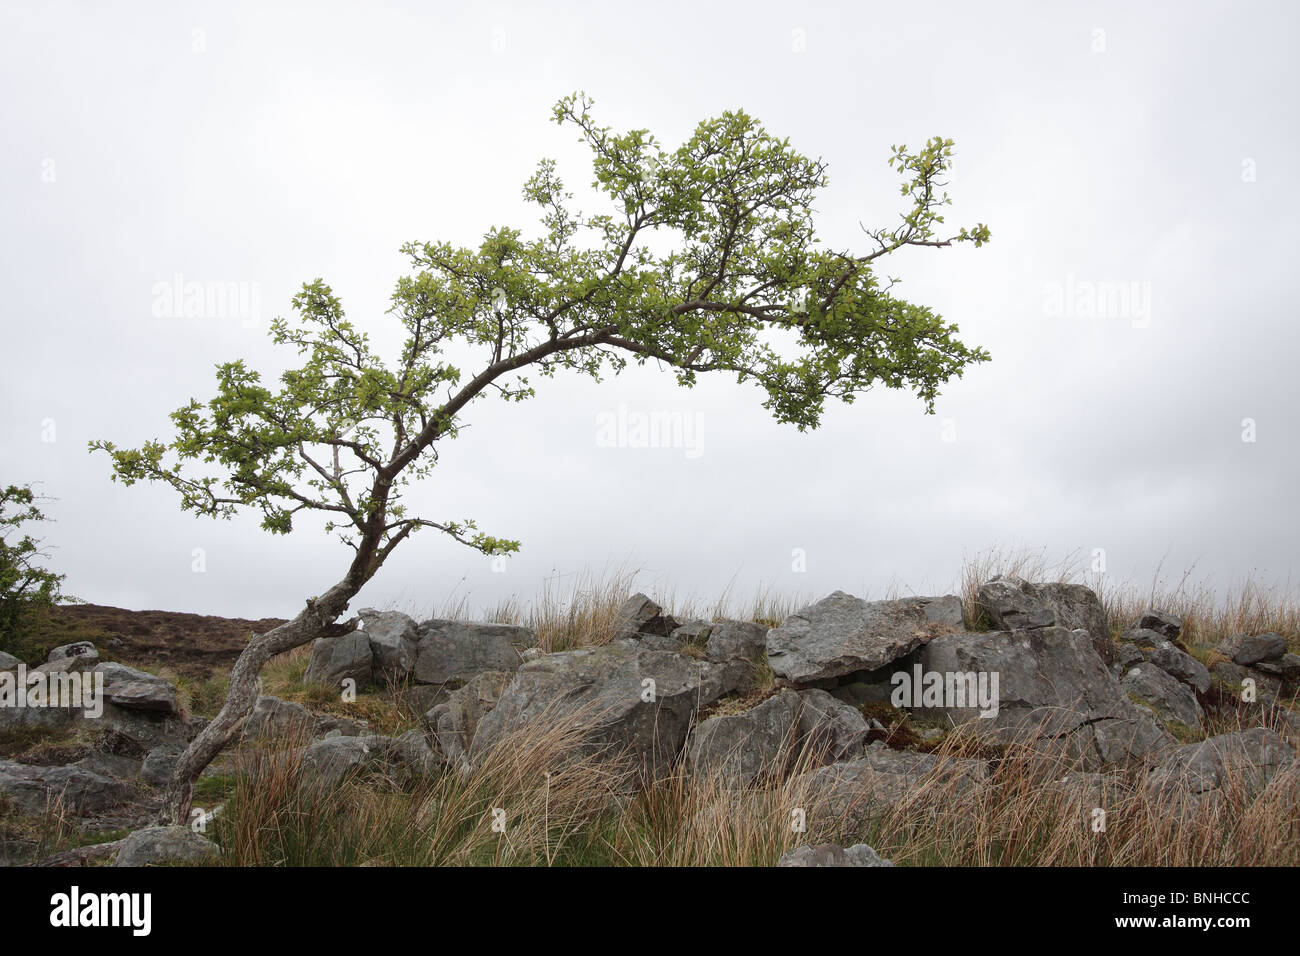 Willow Tee in a limestone landscape. Stock Photo